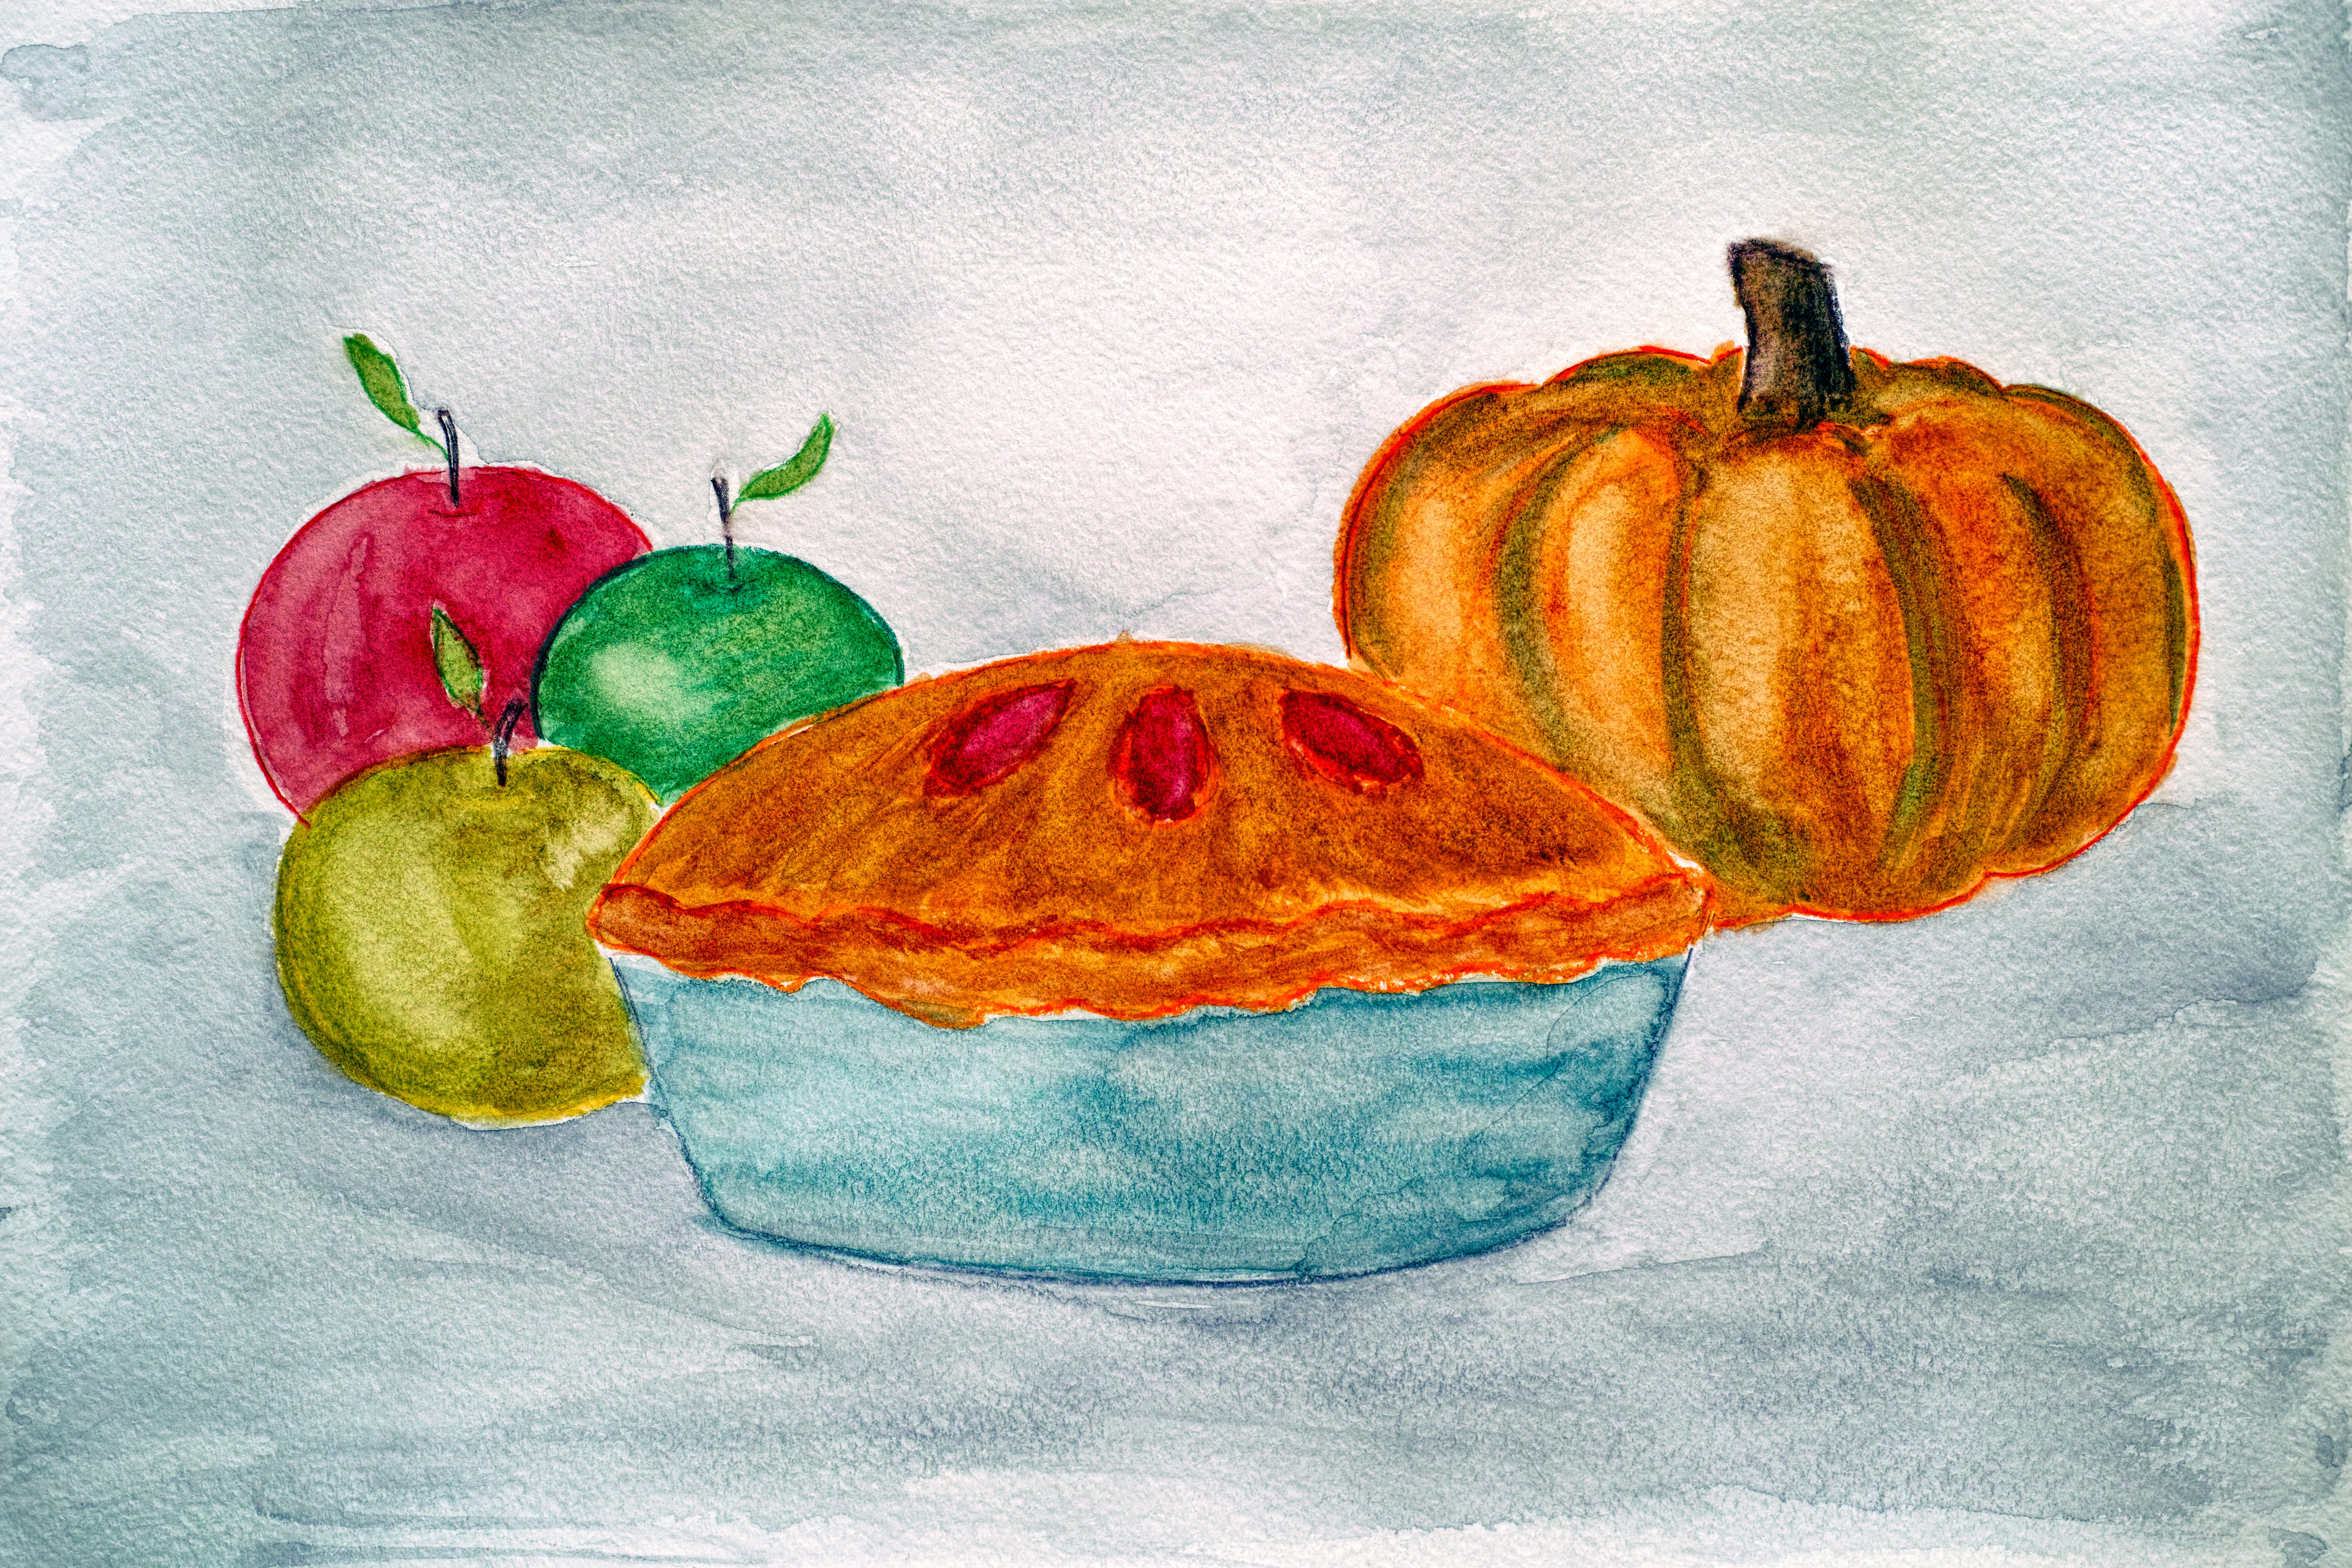 Apple Pie and other food